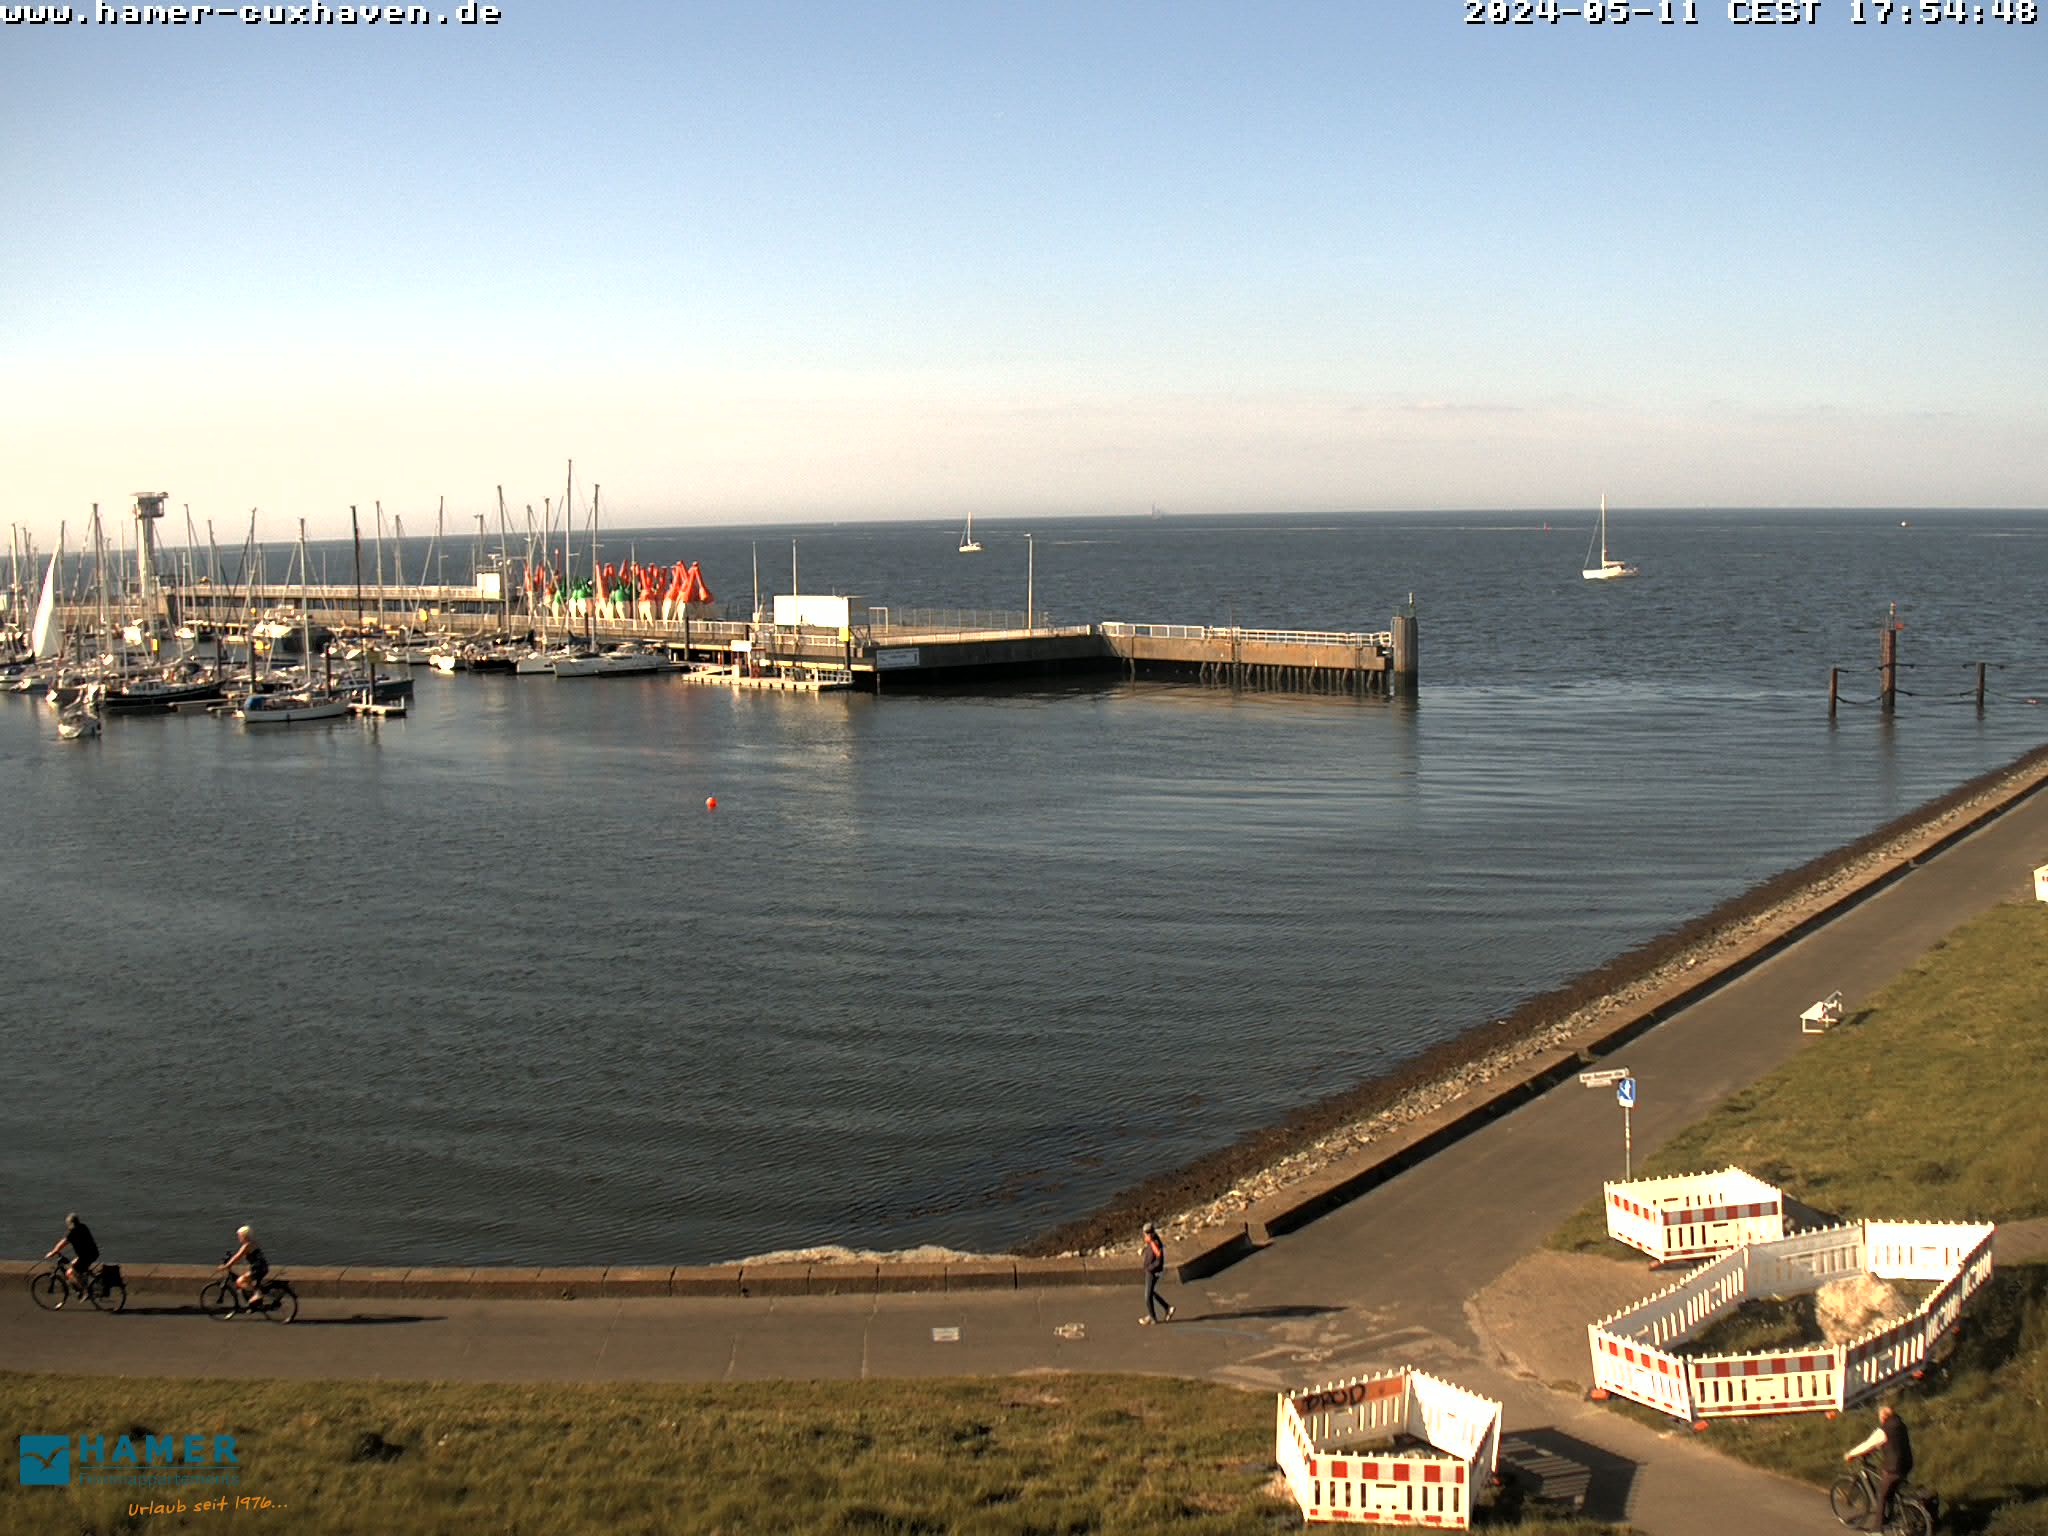 Cuxhaven Ons. 17:55